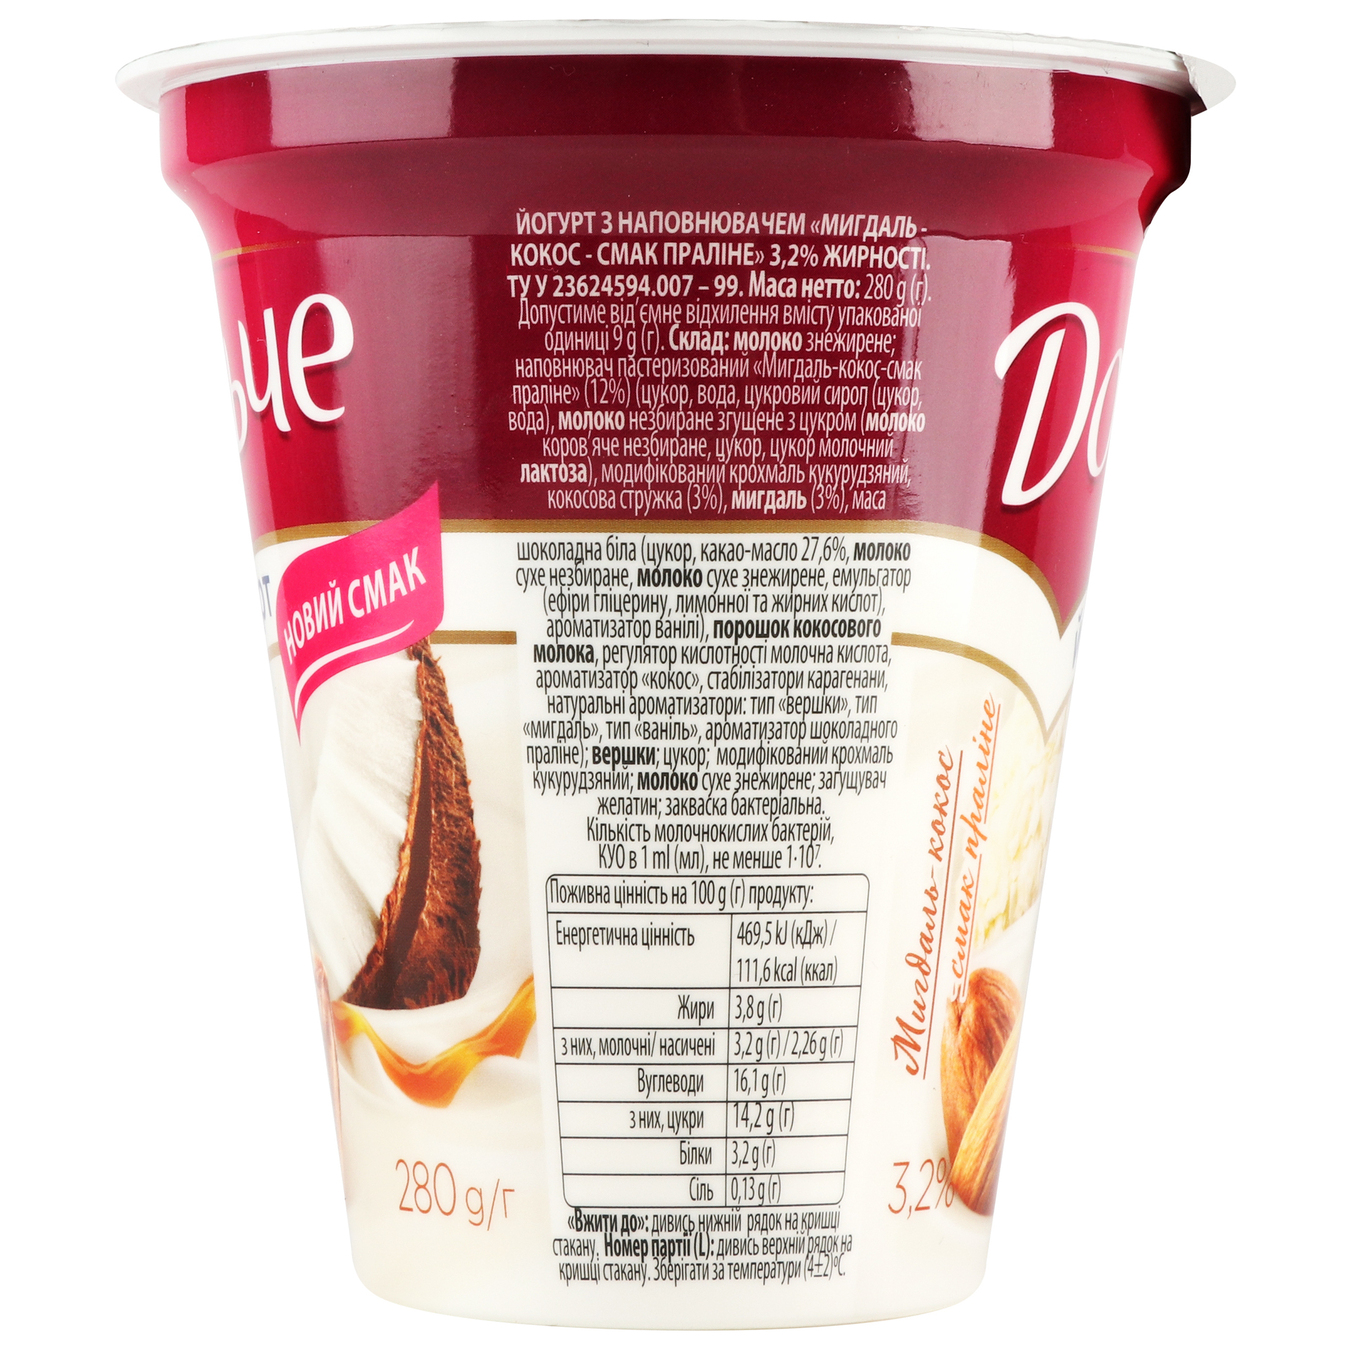 Yogurt Dolce with filling Almond-coconut-flavored praline glass 3.2% 280g 4